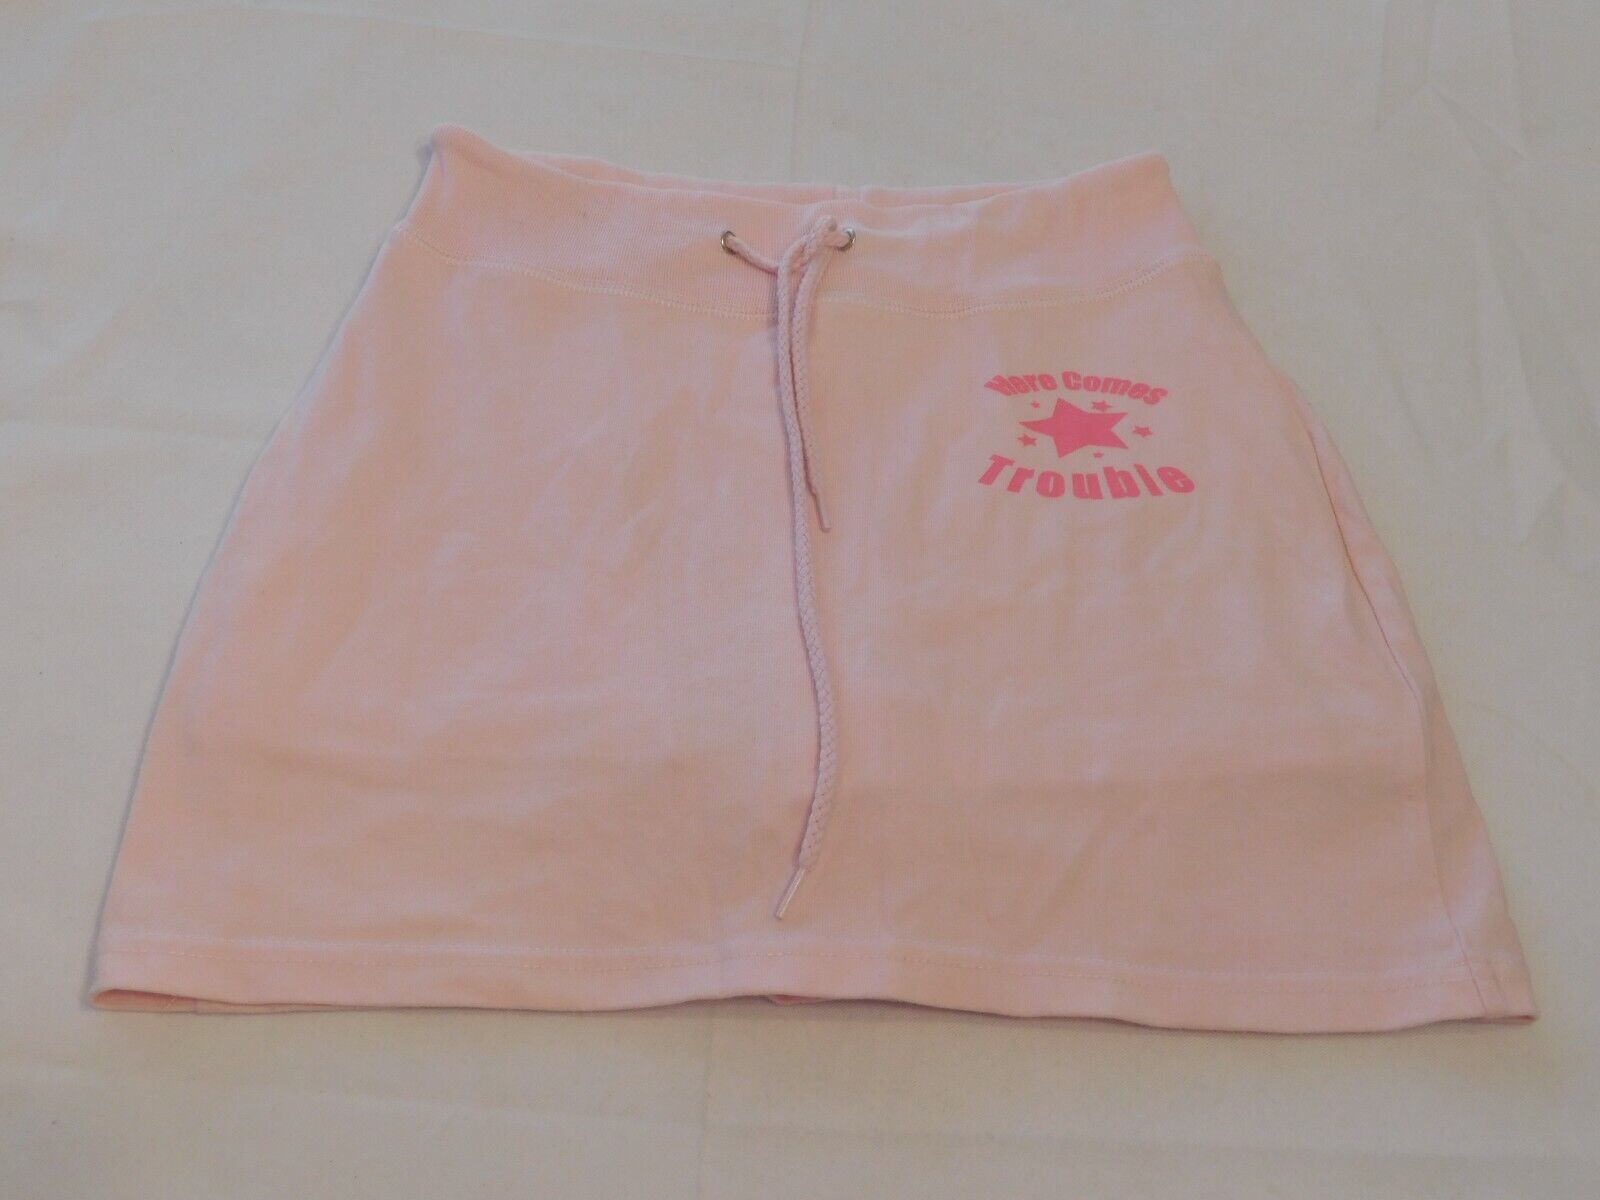 Primary image for Lee Sport Girl's Youth Skirt Skort Size S 7/8 Lt Pink "Here Comes Trouble"  GUC